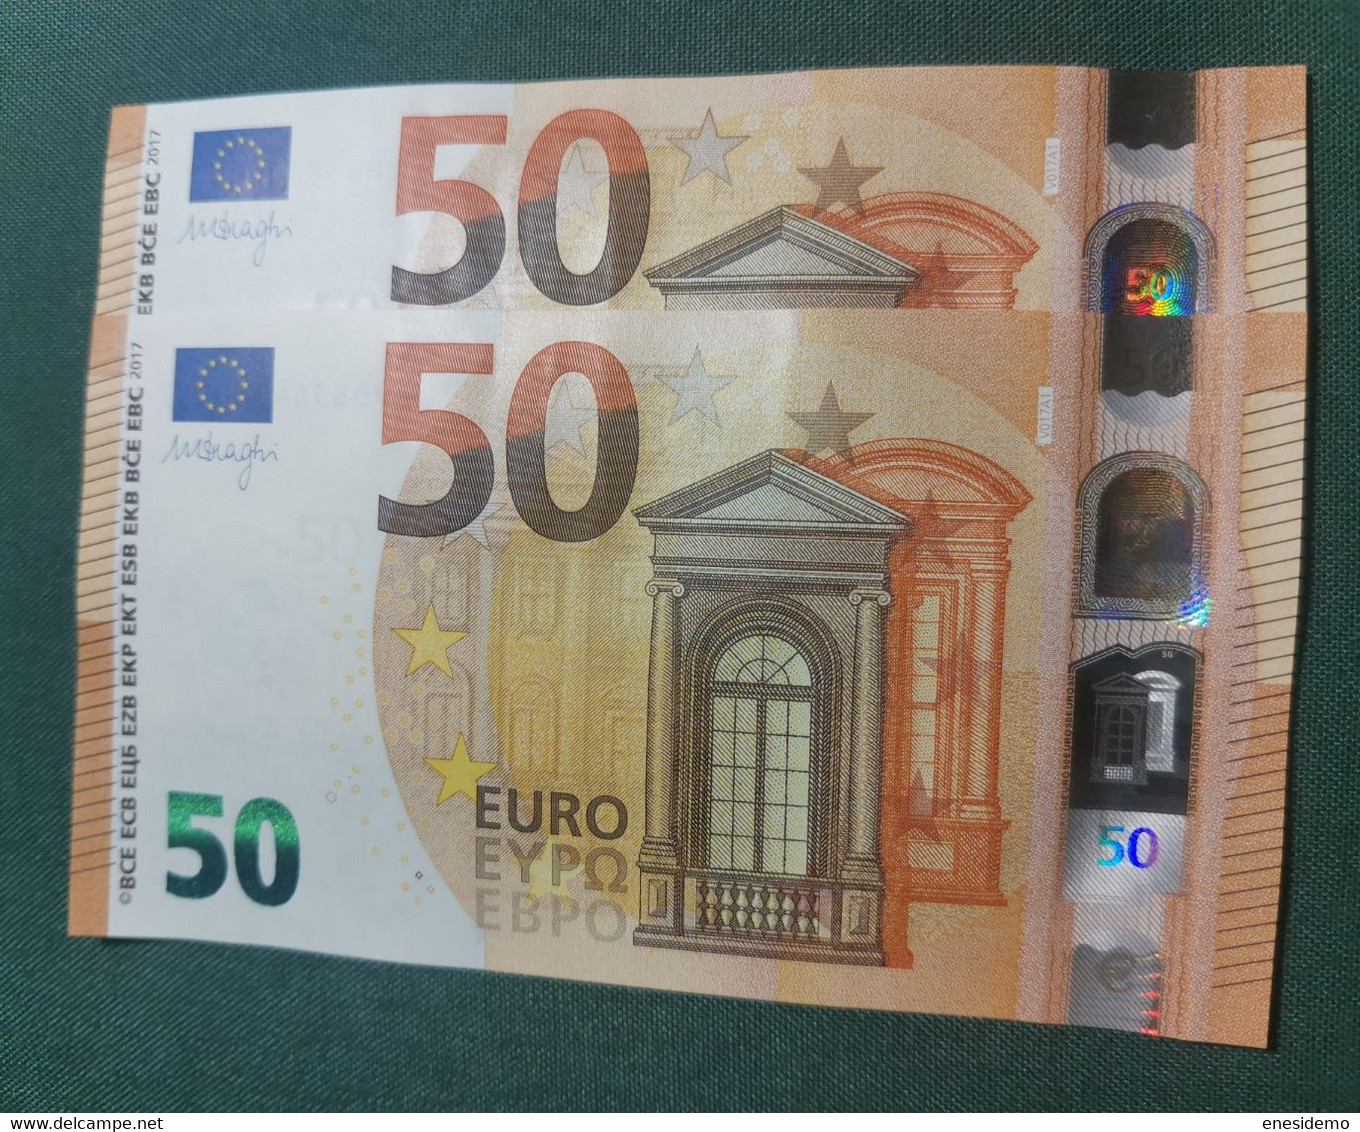 50 EURO SPAIN DRAGHI  2014 V017A1 VB CORRELATIVE COUPLE SC FDS UNCIRCULATED PERFECT